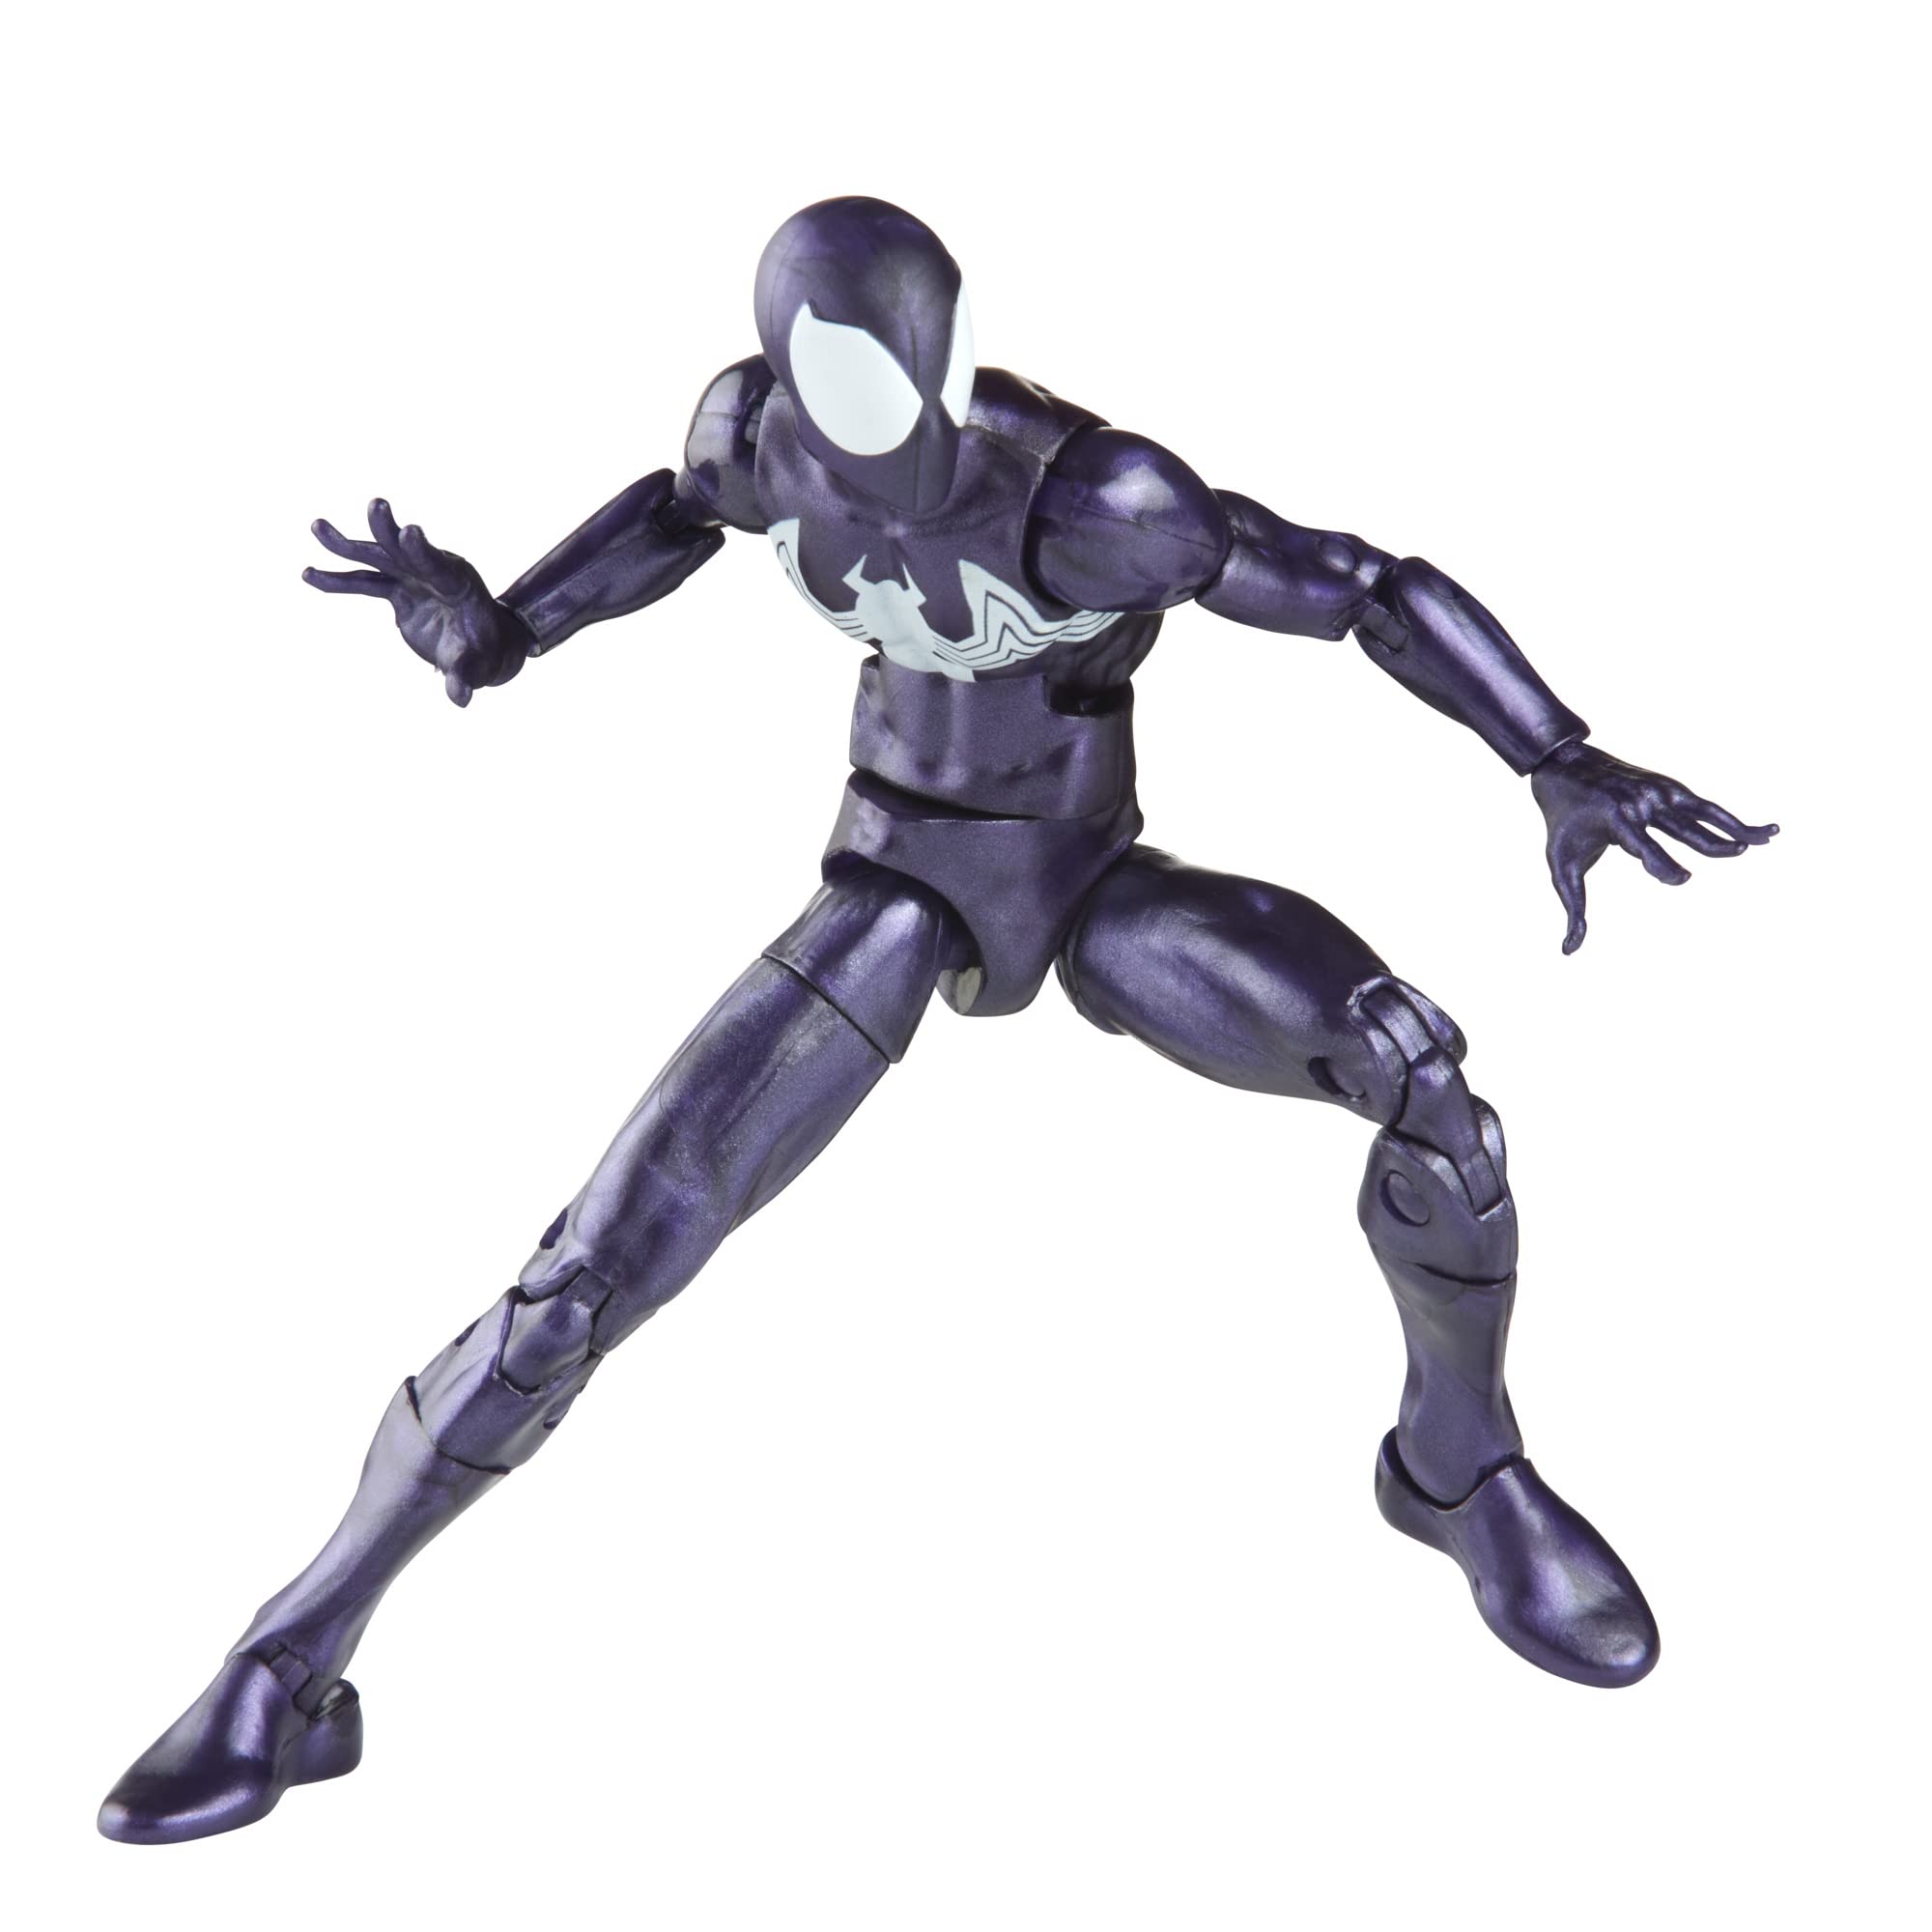 Marvel Legends Series Spider-Man Multipack, 6-Inch-Scale Collectible Action Figures with 14 Accessories, Toys for Kids Ages 4 and Up (Amazon Exclusive)